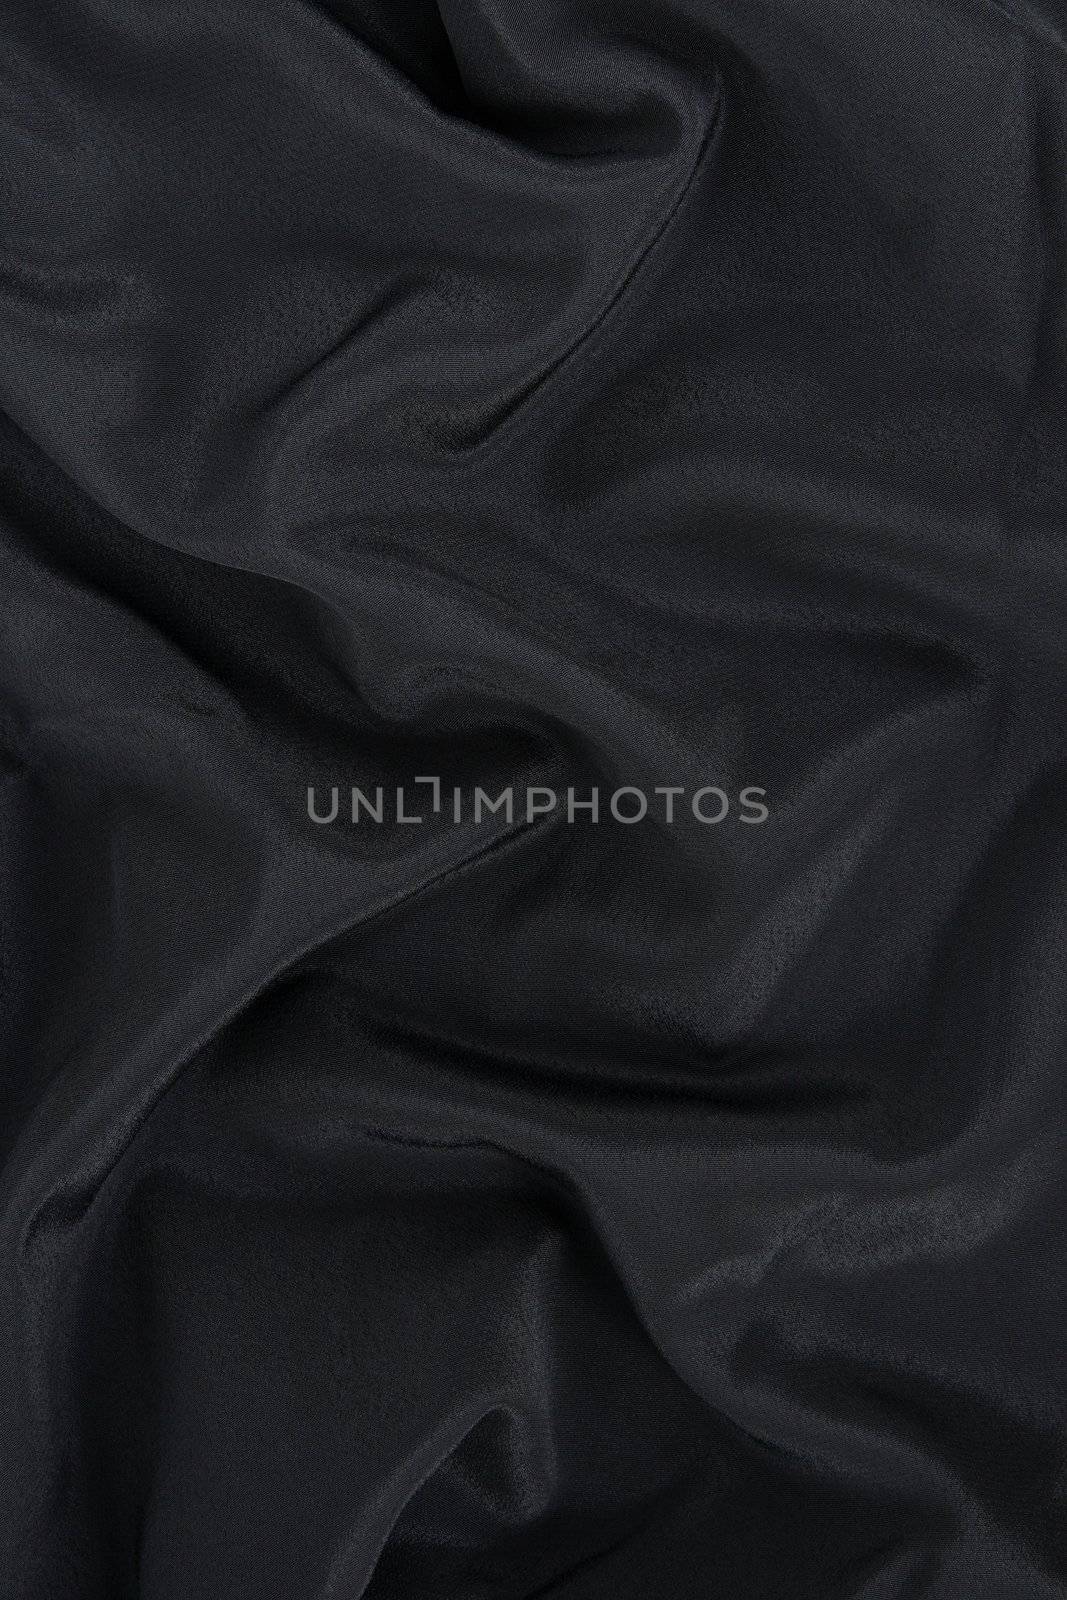 Black satin fabric. Abstract background.